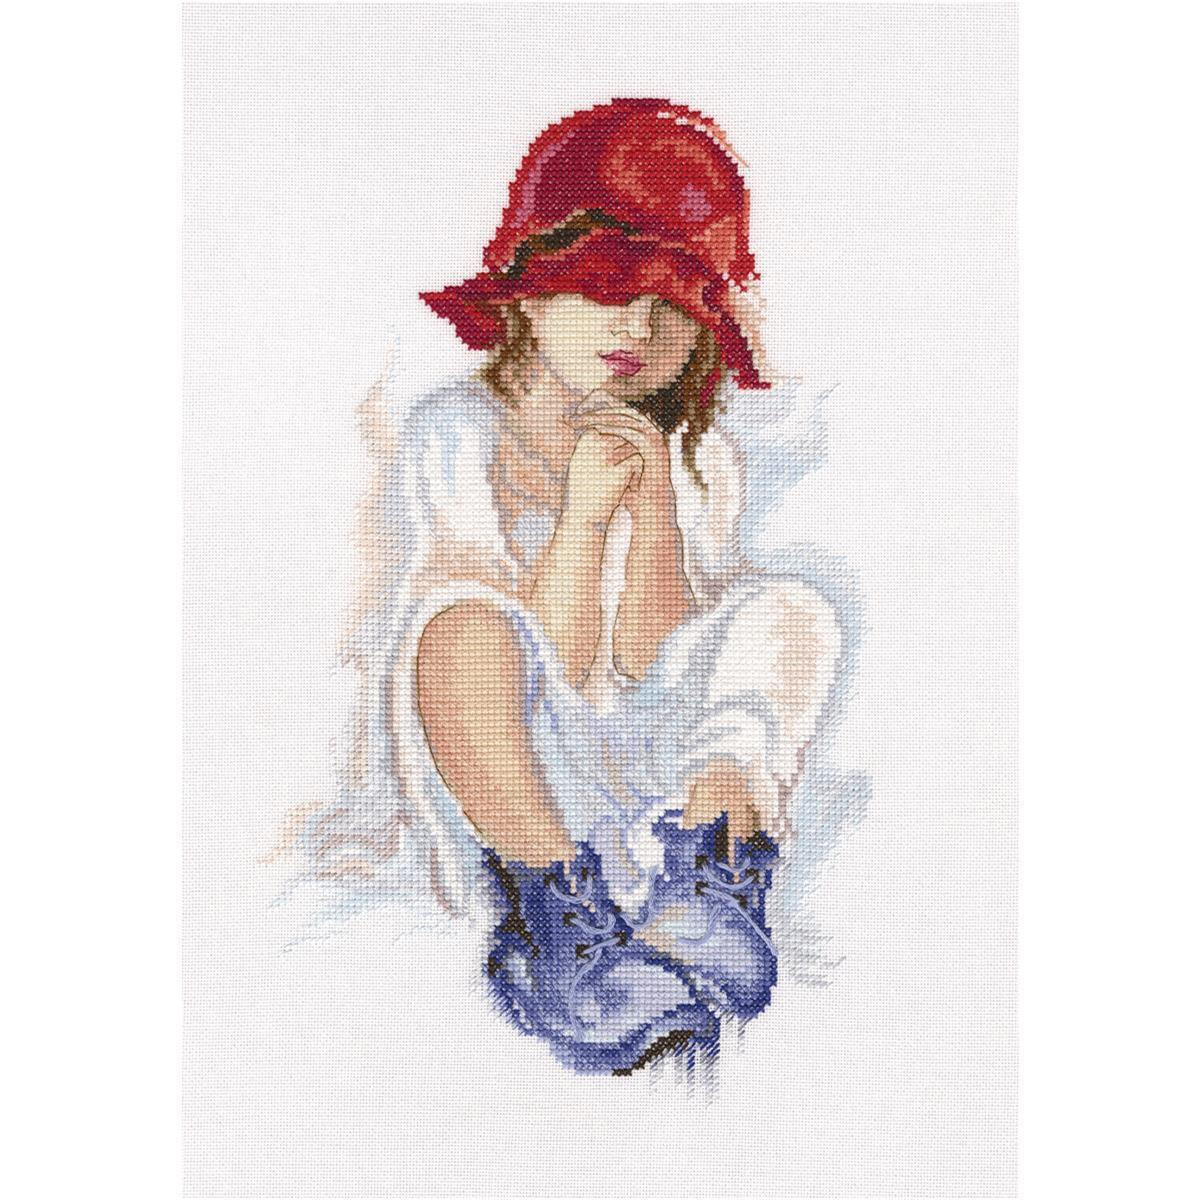 RTO counted Cross Stitch Kit "Girl dreaming"...